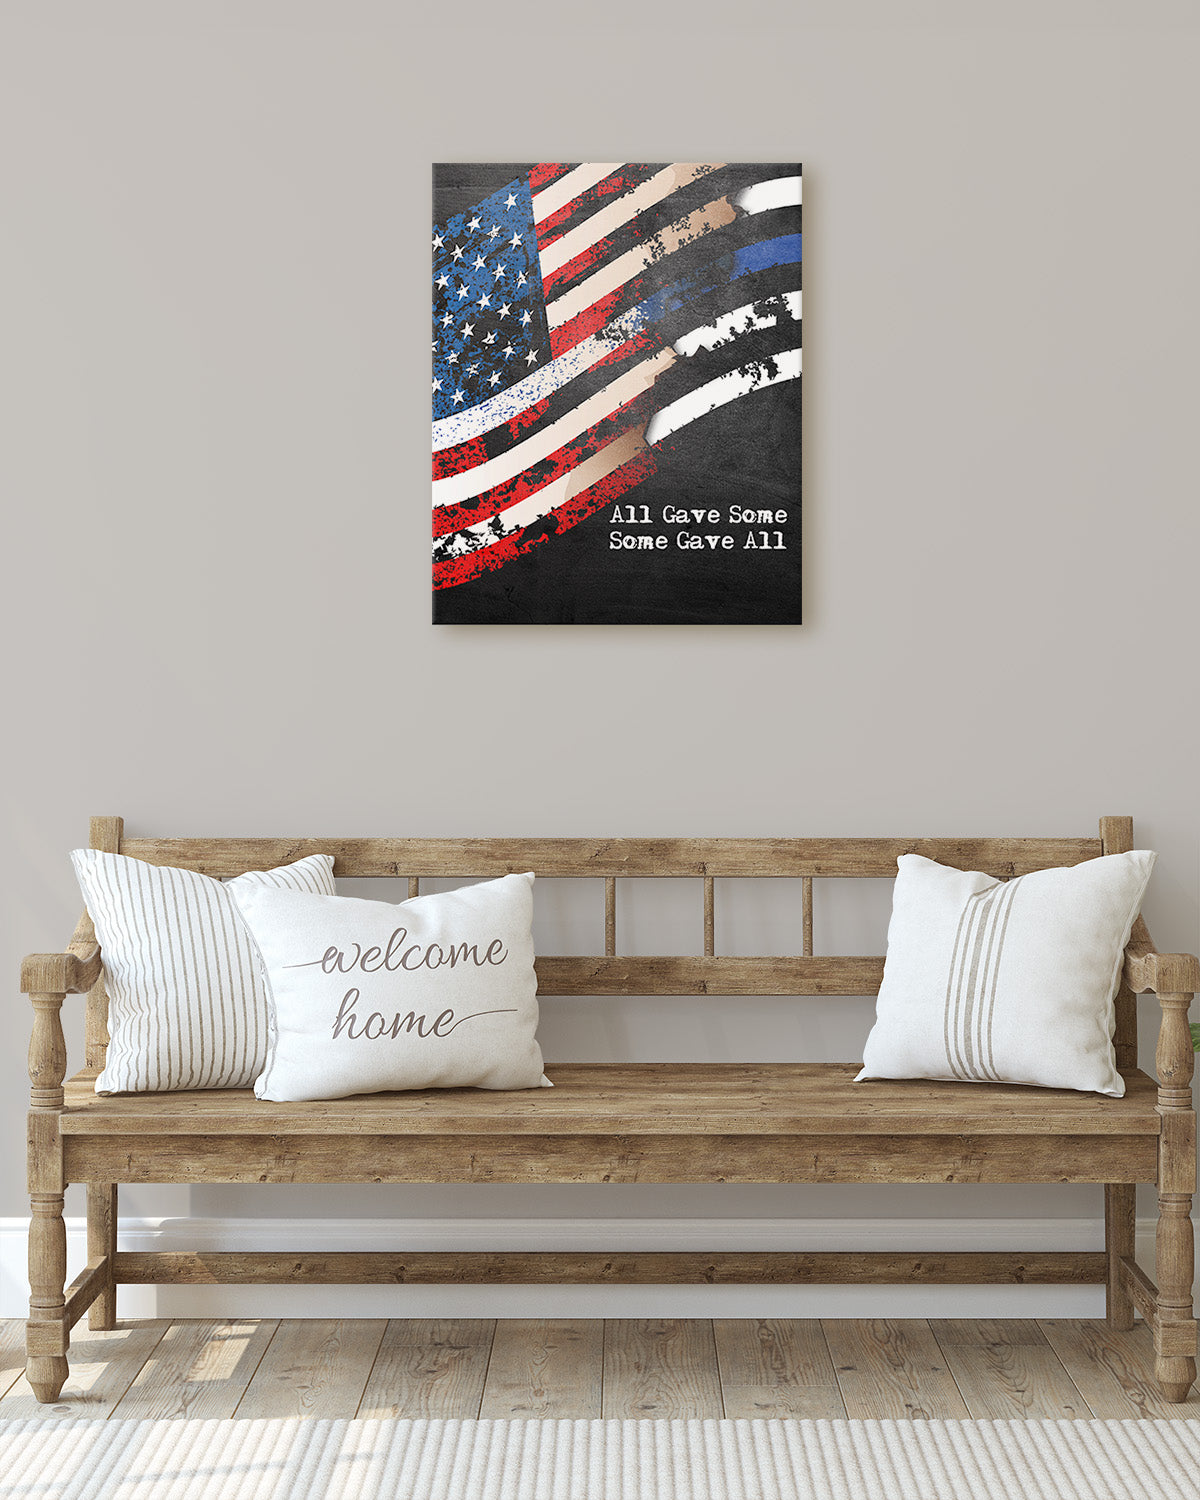 All Gave Some, Some Gave All - Law Enforcement Wall art - Police Officer Gifts